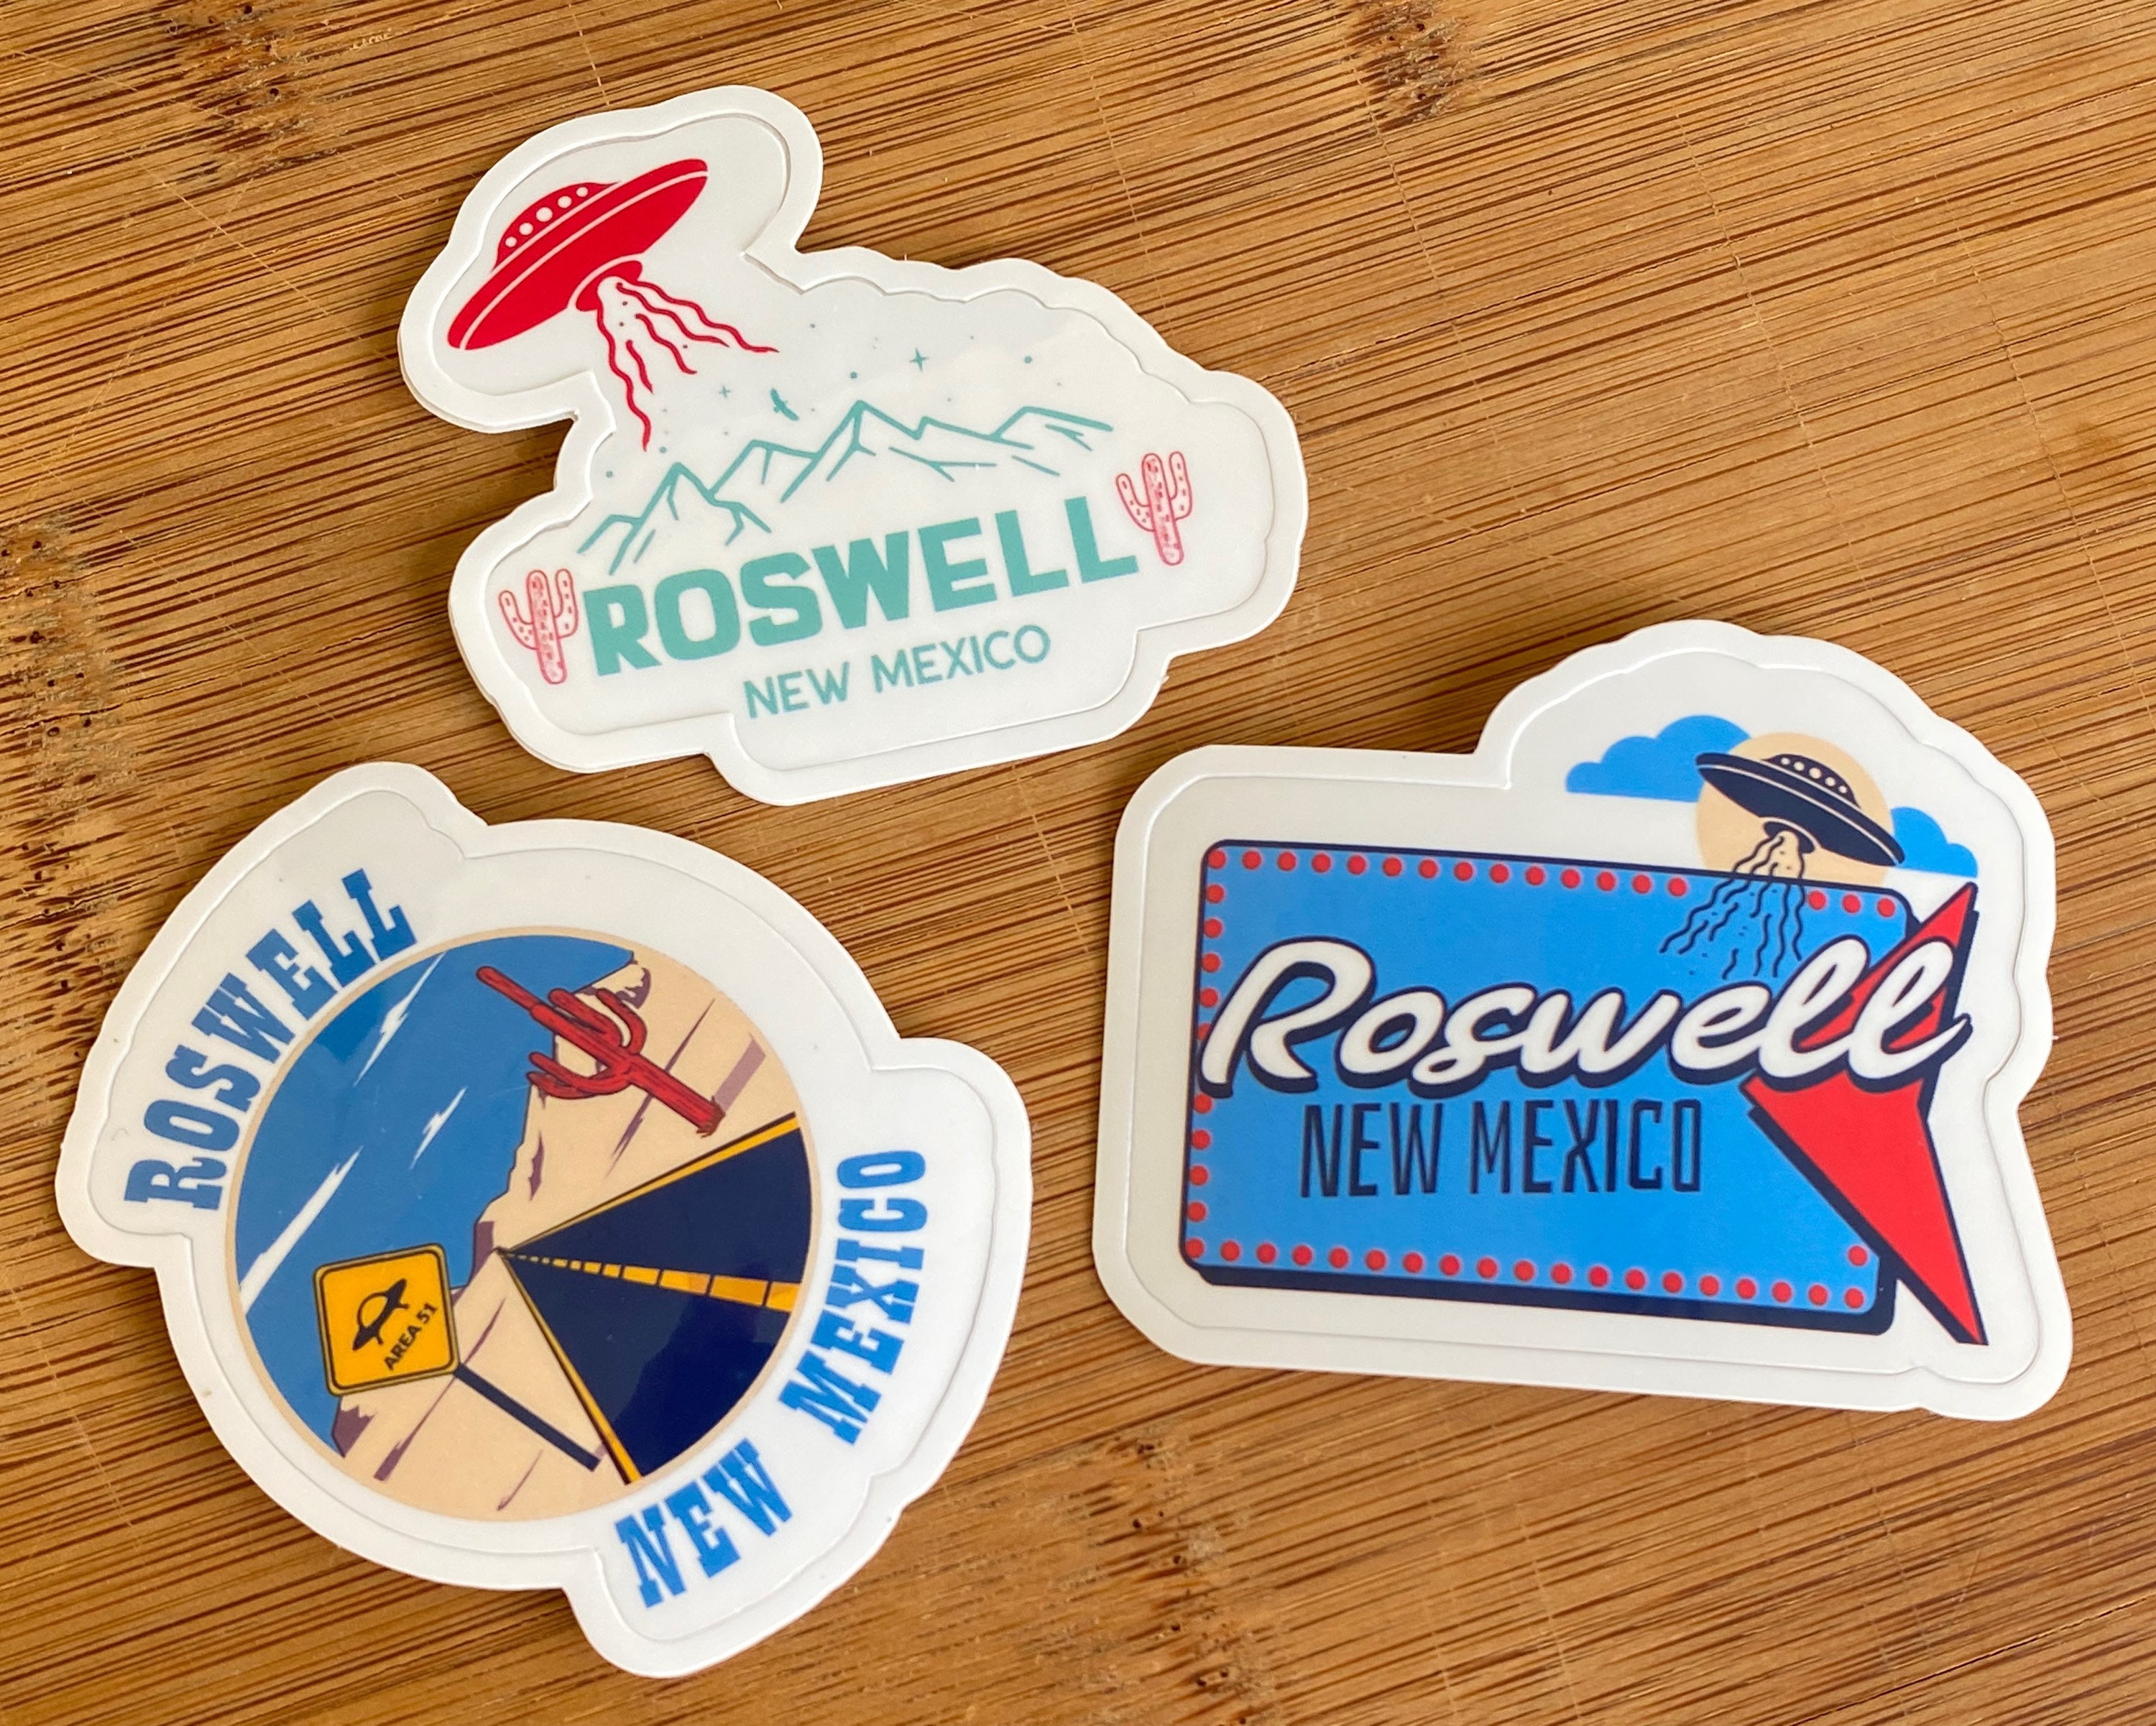 Roswell New Mexico Sticker Roswell UFO Roswell NM Stickers - Etsy